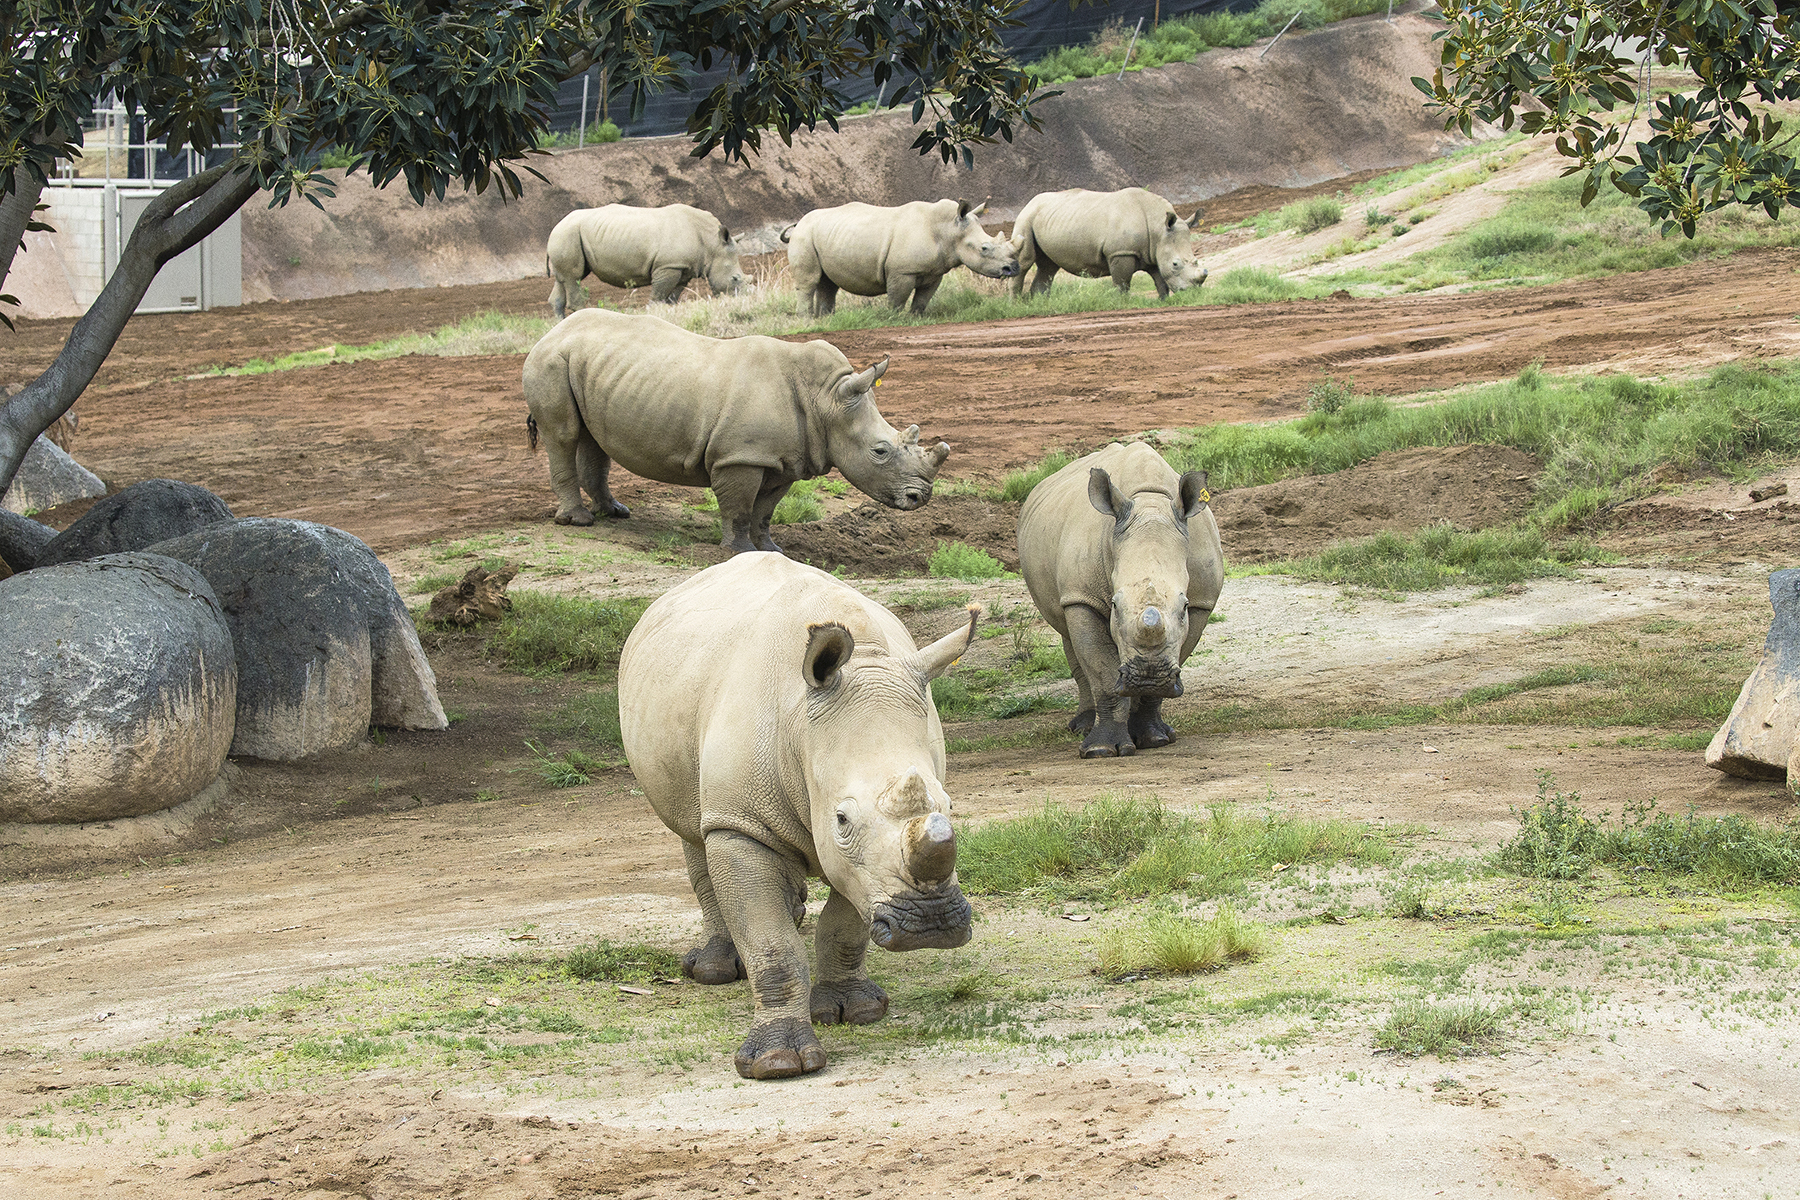 Six female southern white rhinos were brought from a reserve in South Africa to live at the Rhino Rescue Center and help researchers determine if assisted reproductive techniques could work with rhinos.